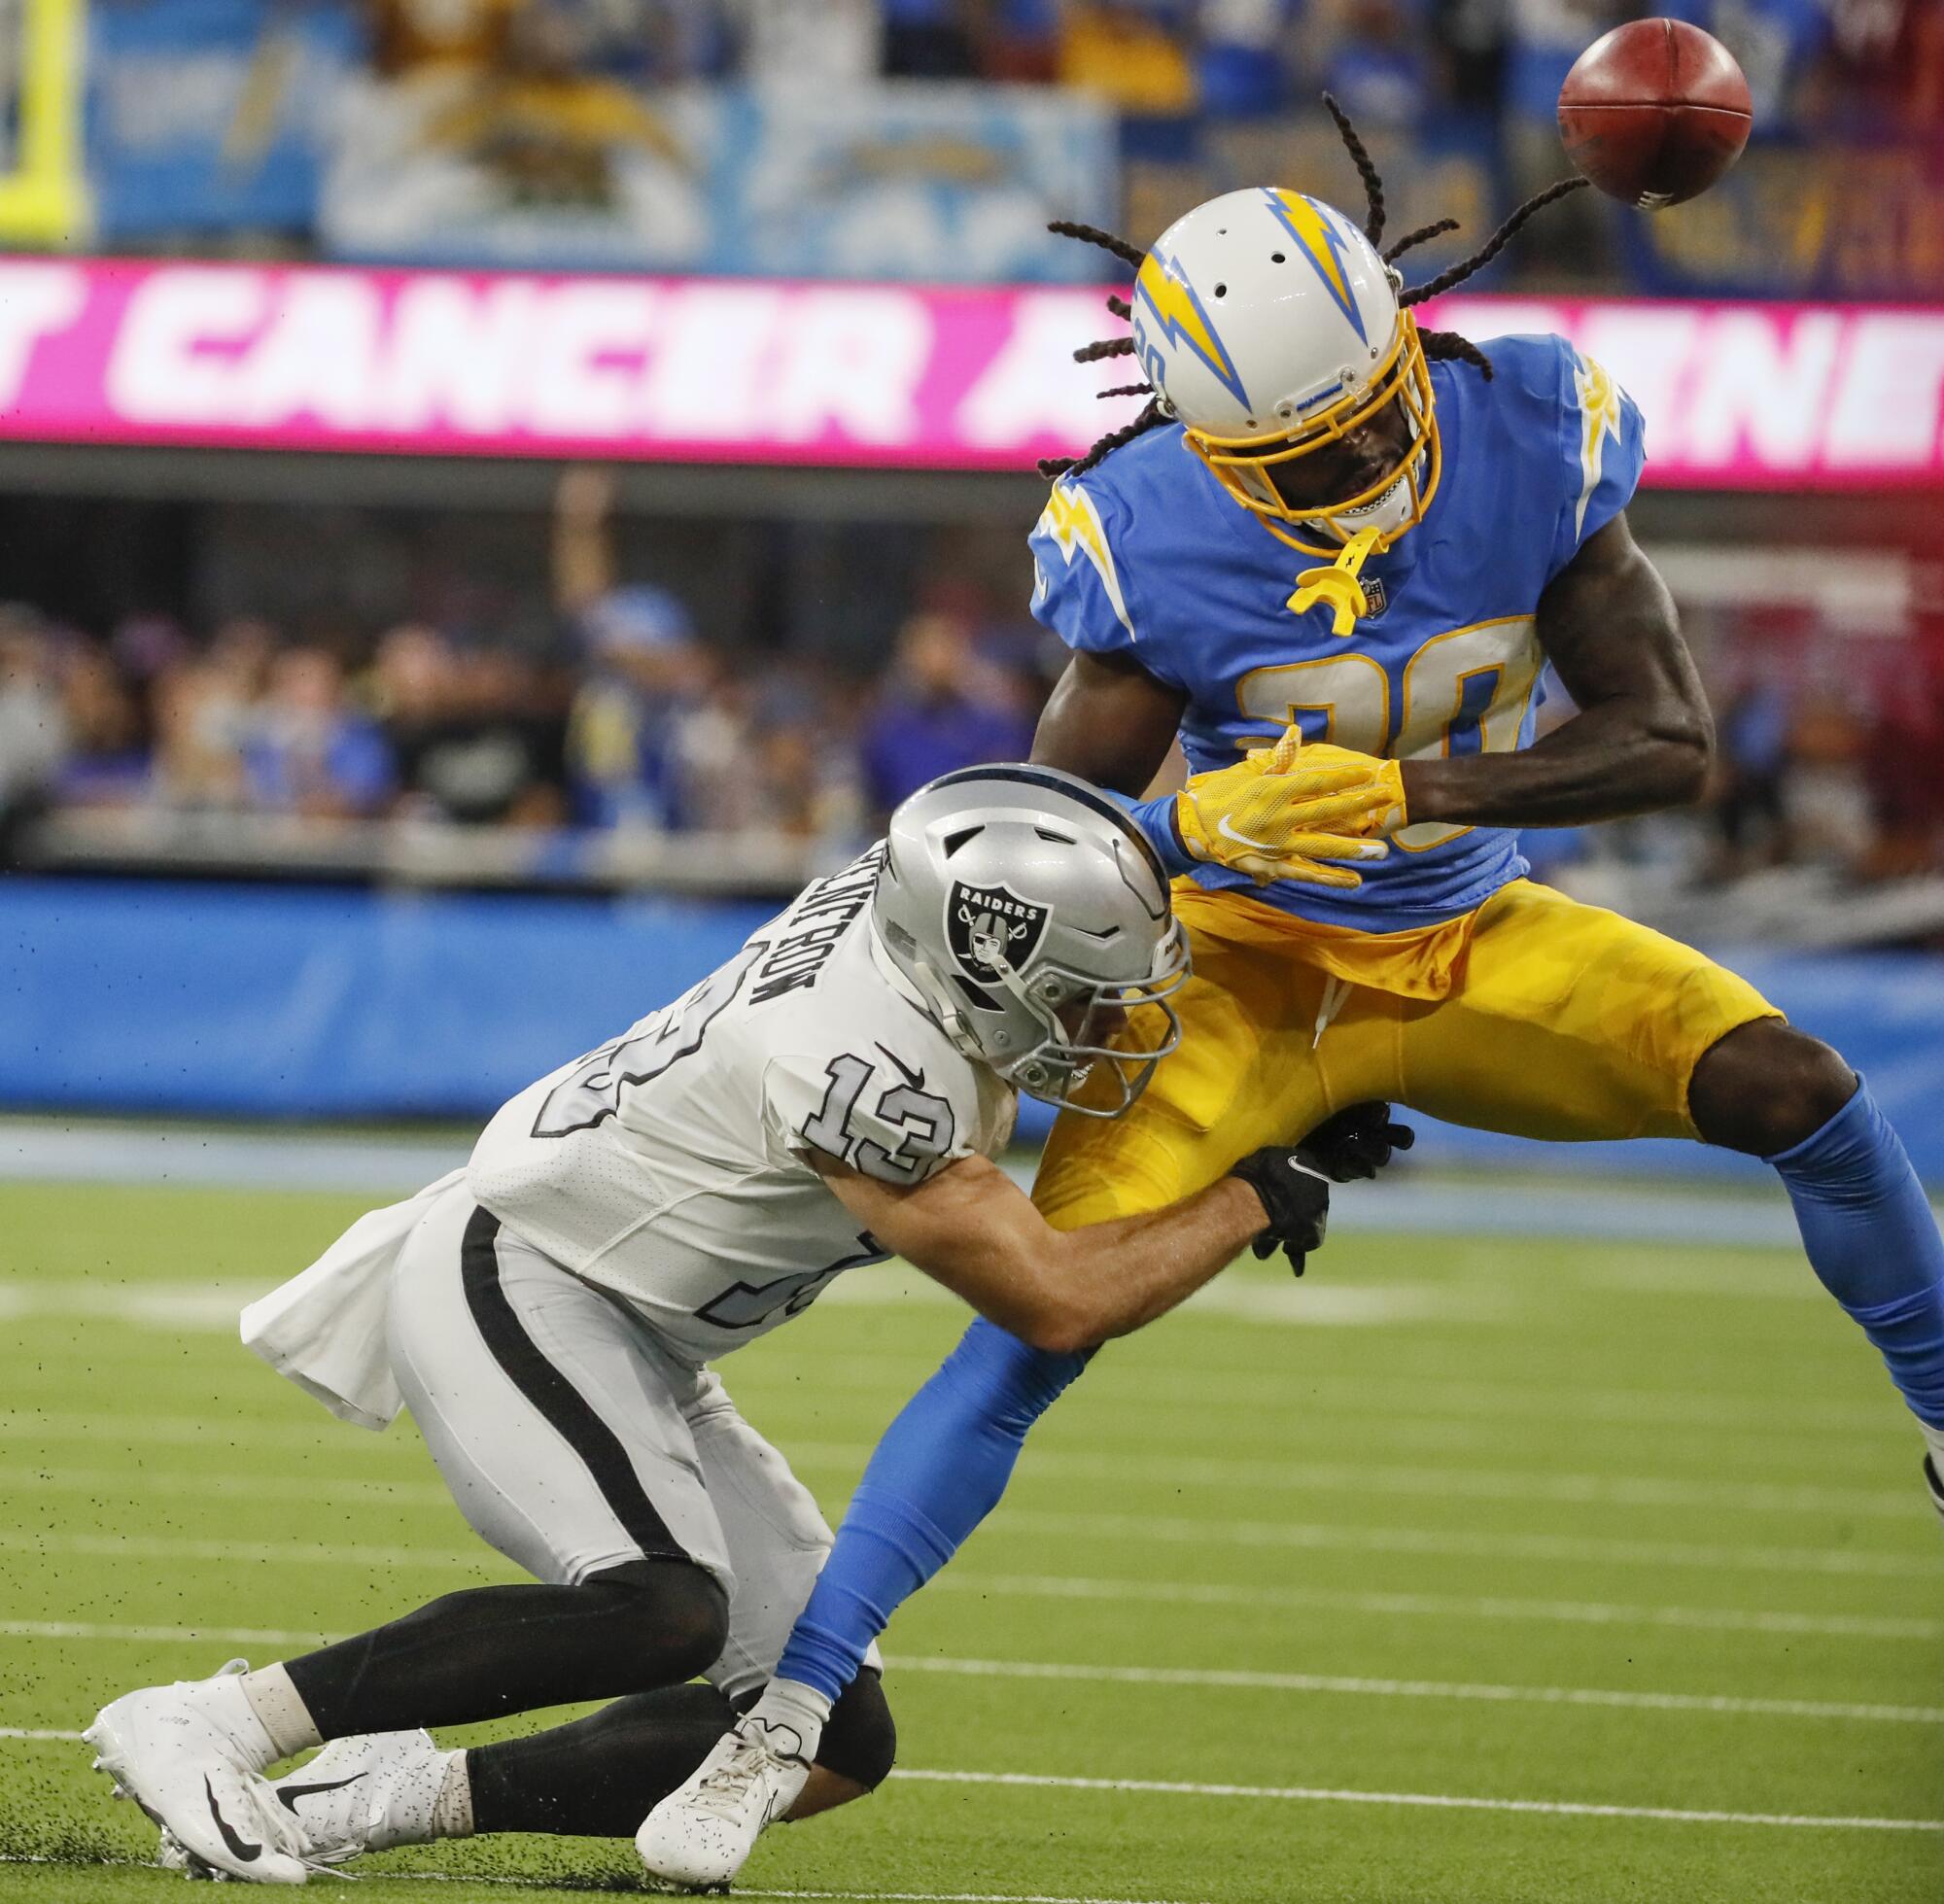 Chargers defensive back Tevaughn Campbell loses control of the ball as Raiders wide receiver Hunter Renfrow knocks it loose.